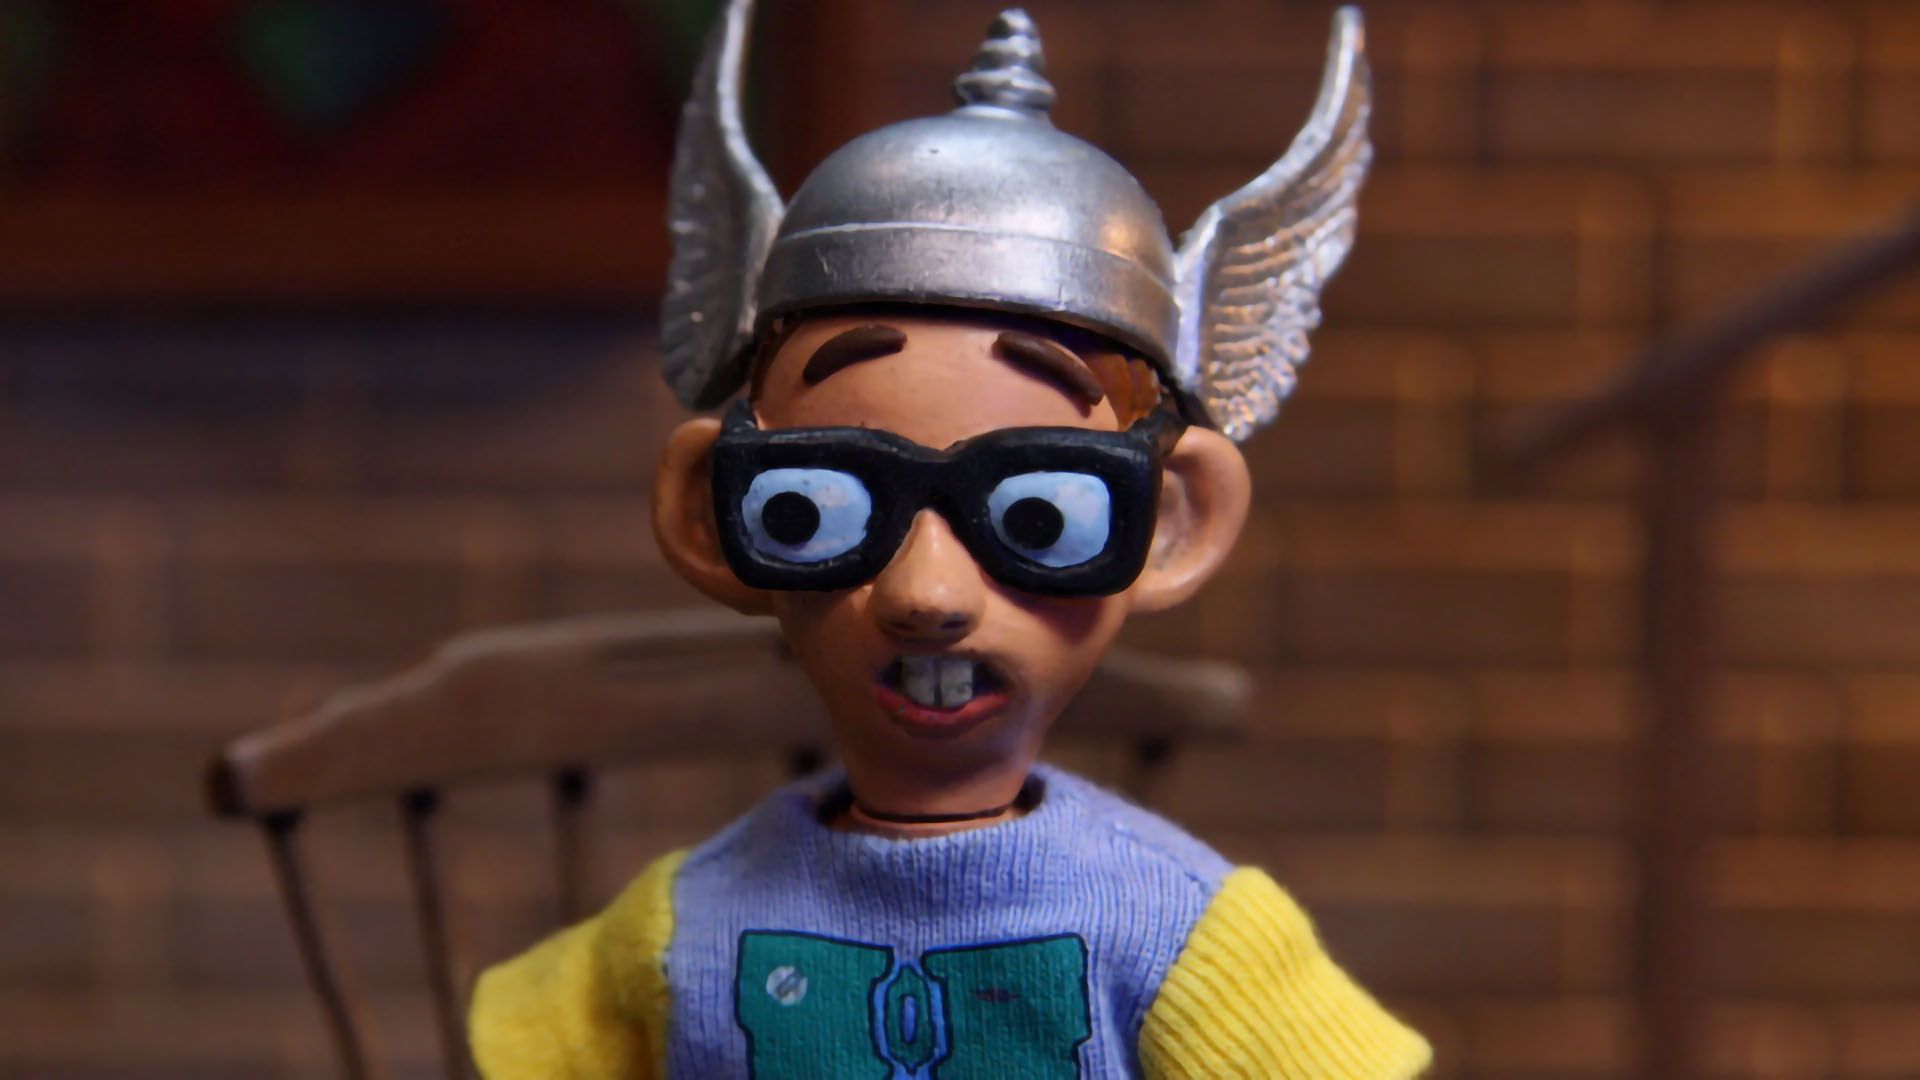 Detenerse molino Consistente Watch Robot Chicken Episodes and Clips for Free from Adult Swim